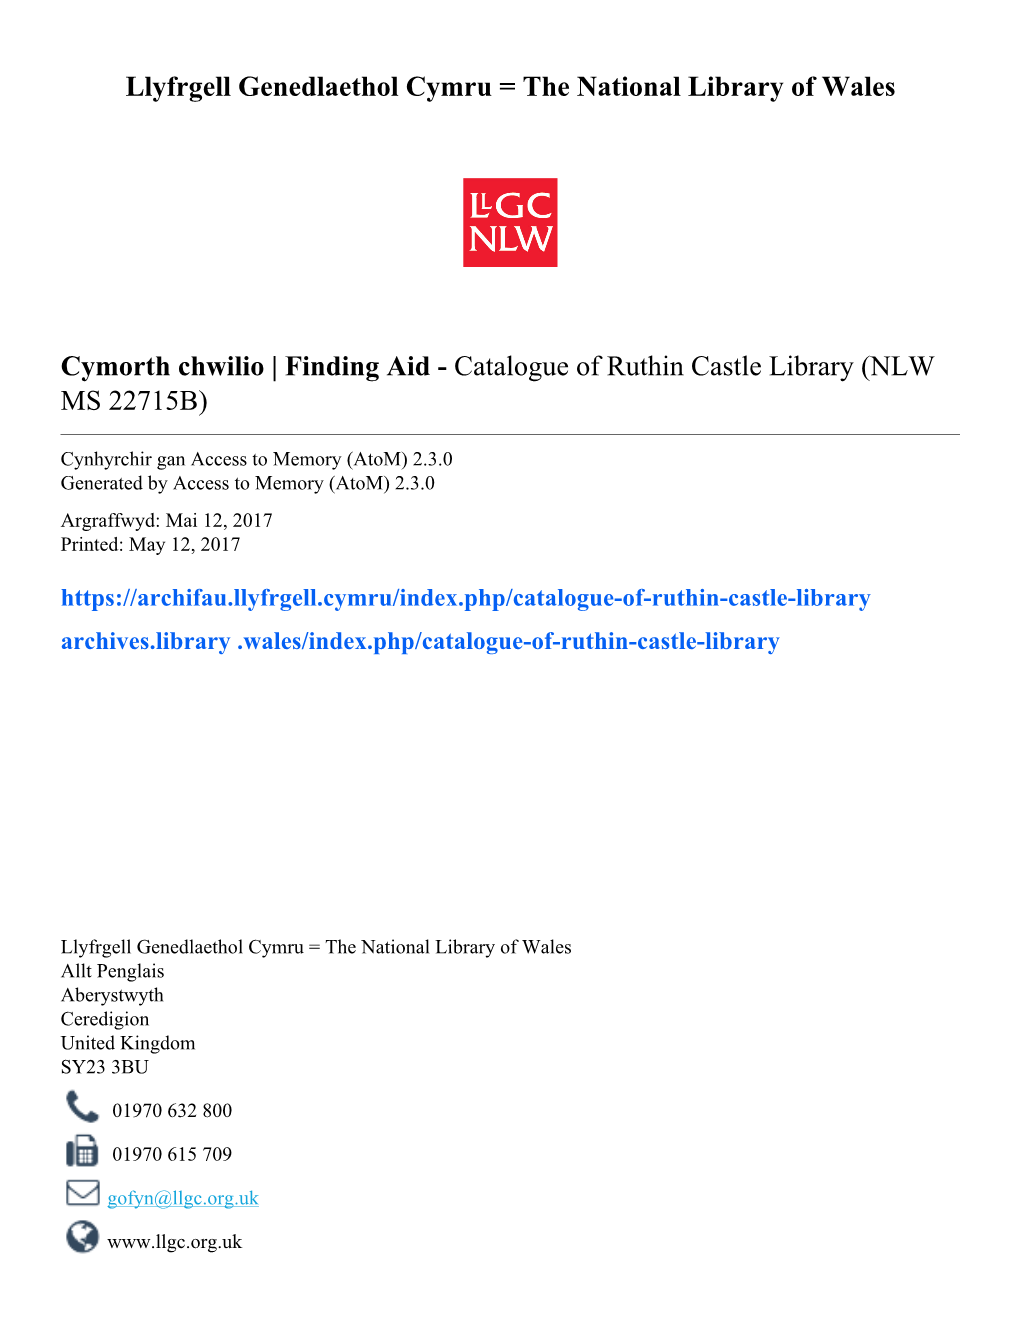 Catalogue of Ruthin Castle Library (NLW MS 22715B)